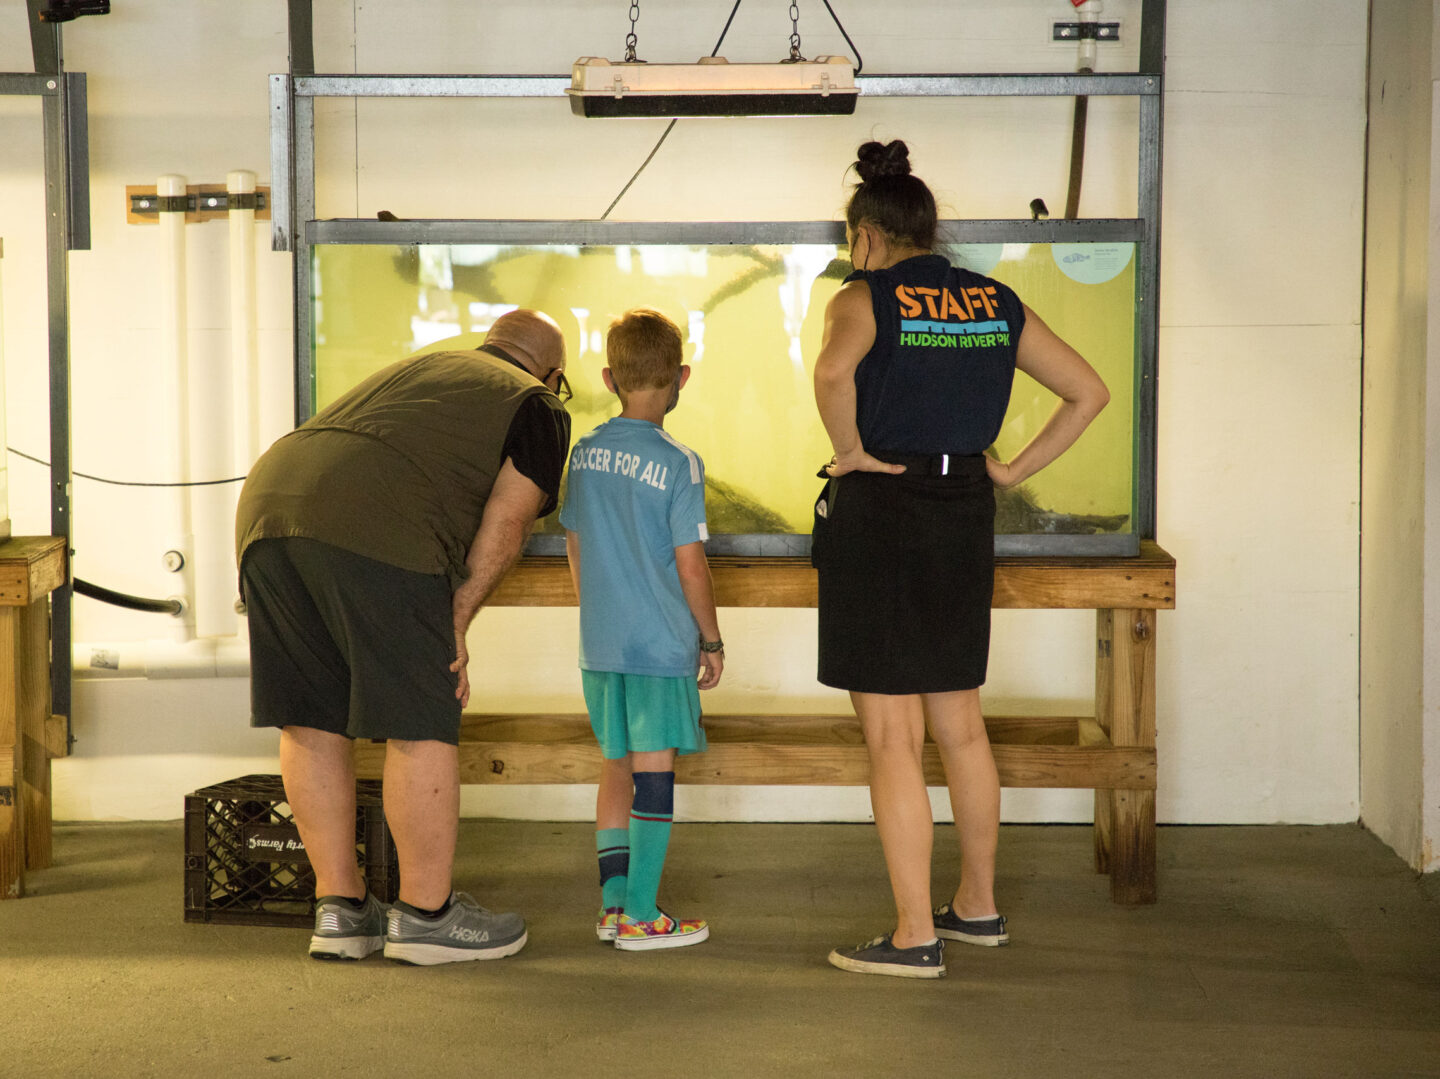 River Project staff looks on as man and son examine the wildlife in the Wetlab at Hudson River Park SUBMERGE